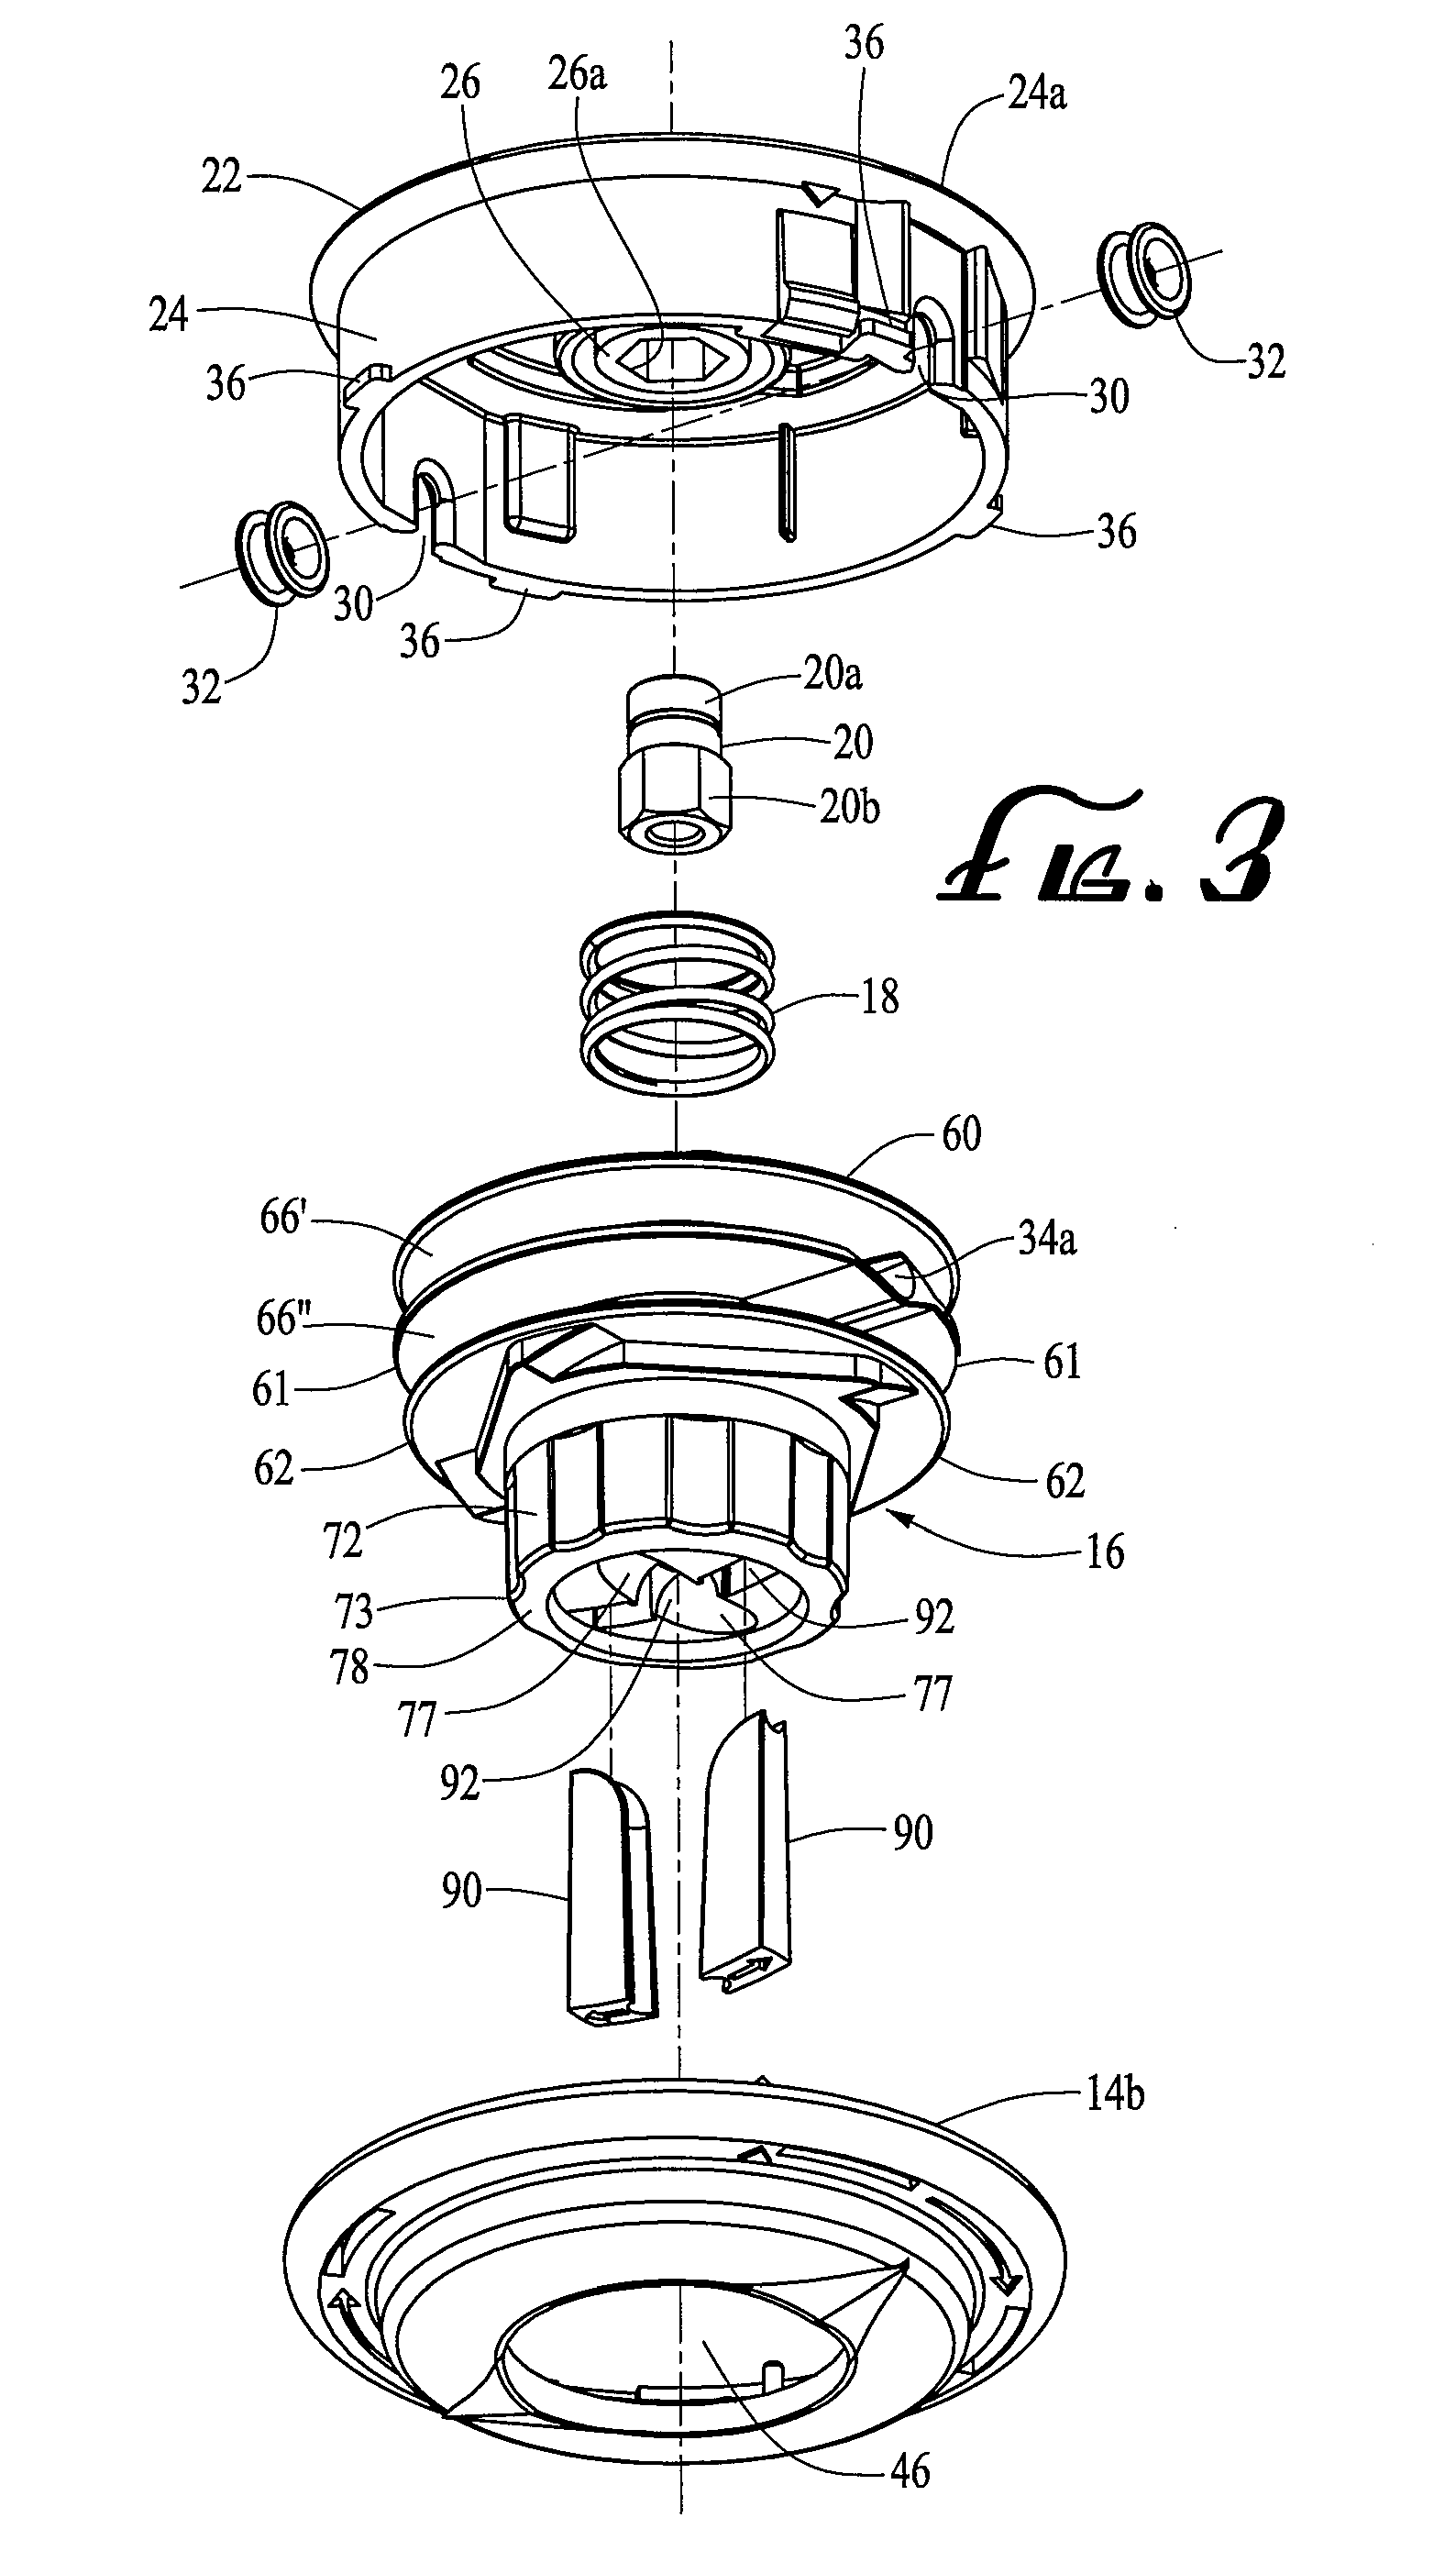 Trimmer Head For Use In Flexible Line Rotary Trimmers Having Improved Line Loading Mechanism